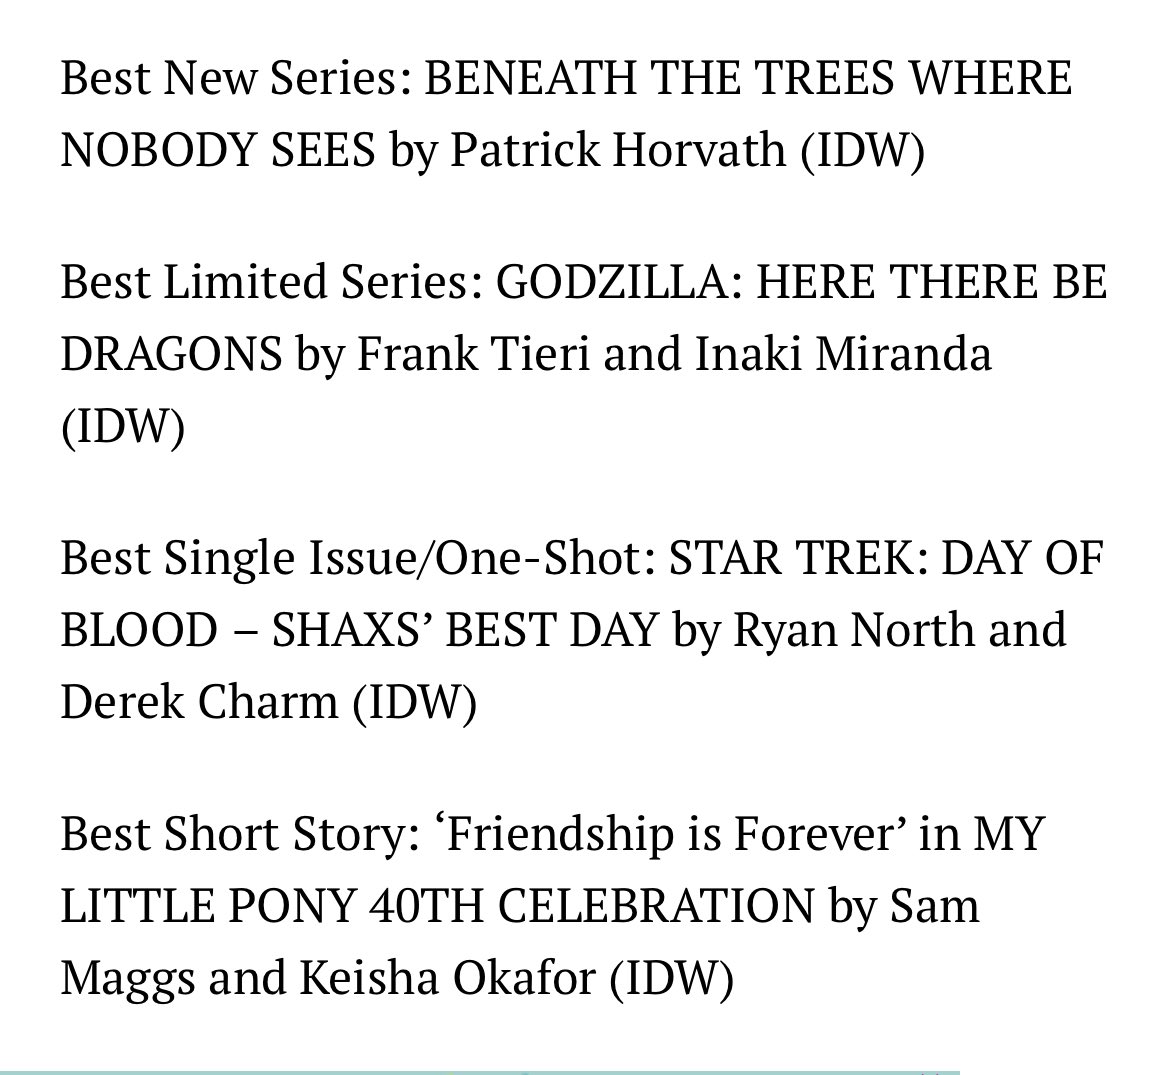 I’M NOMINATED FOR AN EISNER AWARD!!!!!!!!!!! Our My Little Pony 40th Anniversary Special FRIENDSHIP IS FOREVER from @IDWPublishing is nominated in the Best Short Story category!!!!!!!!!!!!!